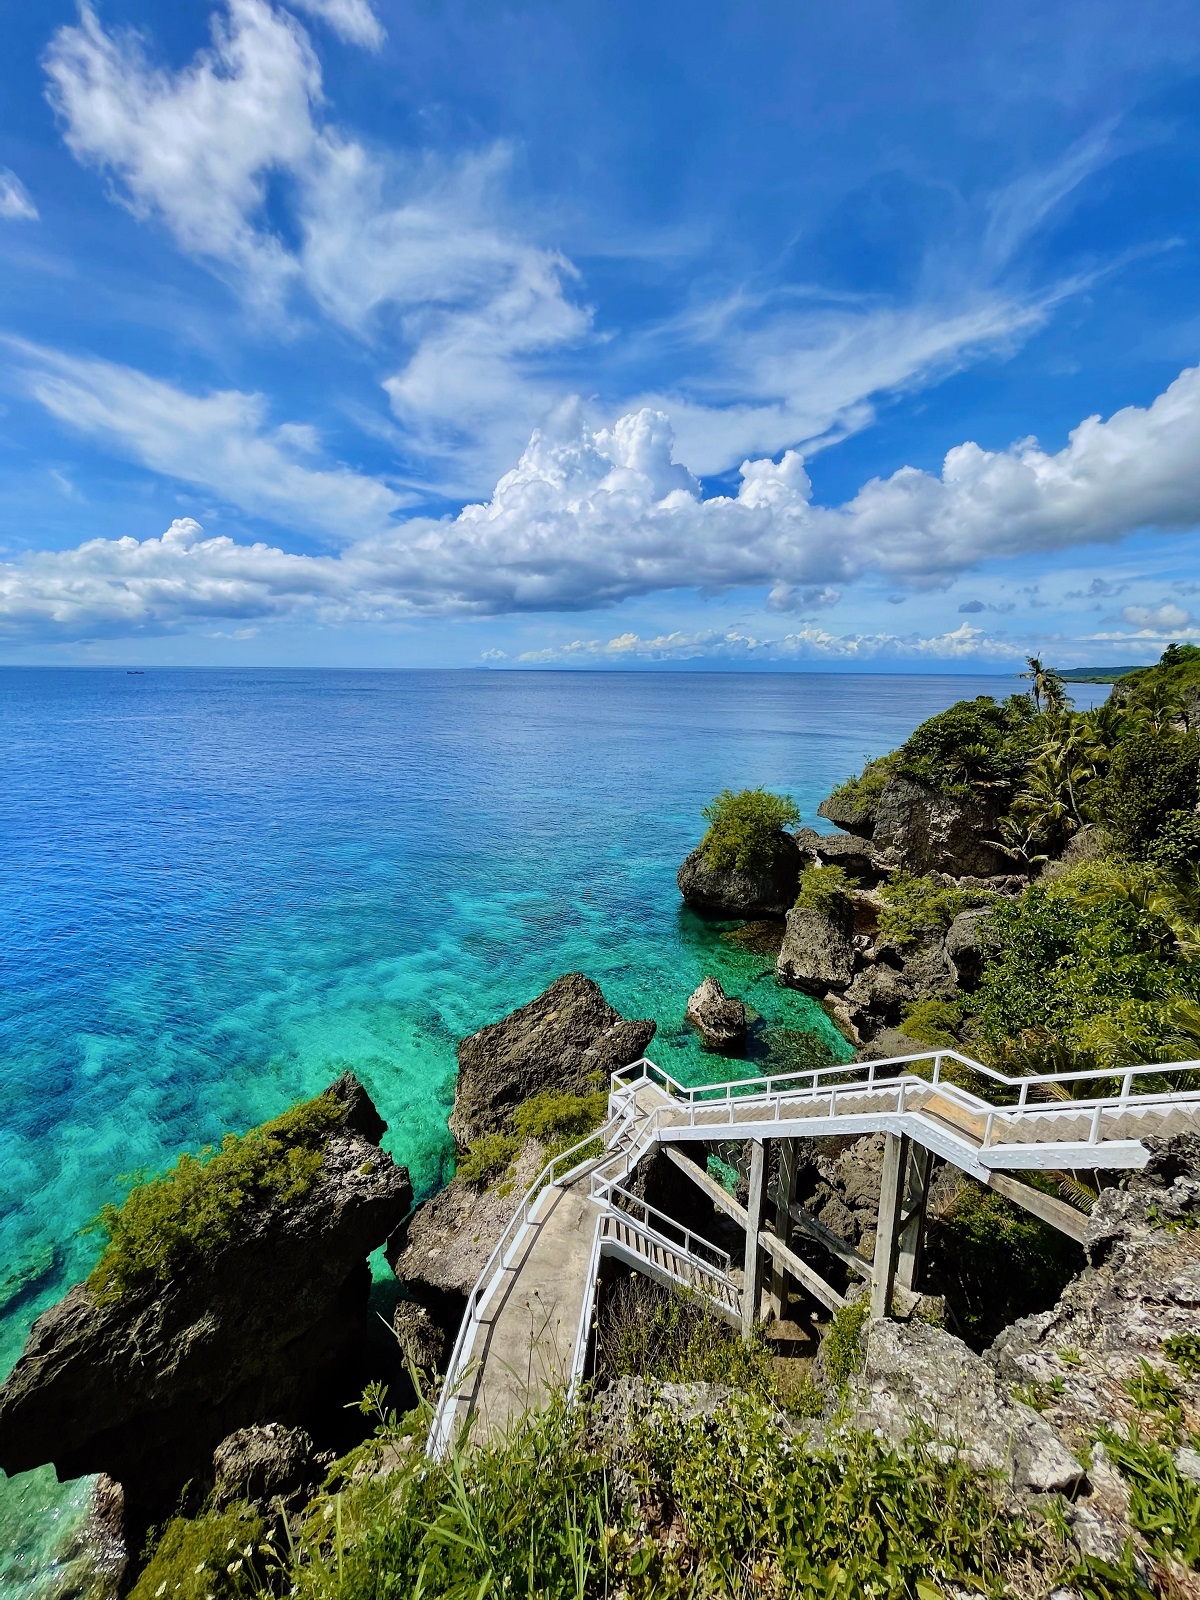 Pitogo Cliff - one of the best tourist spots in Siquijor